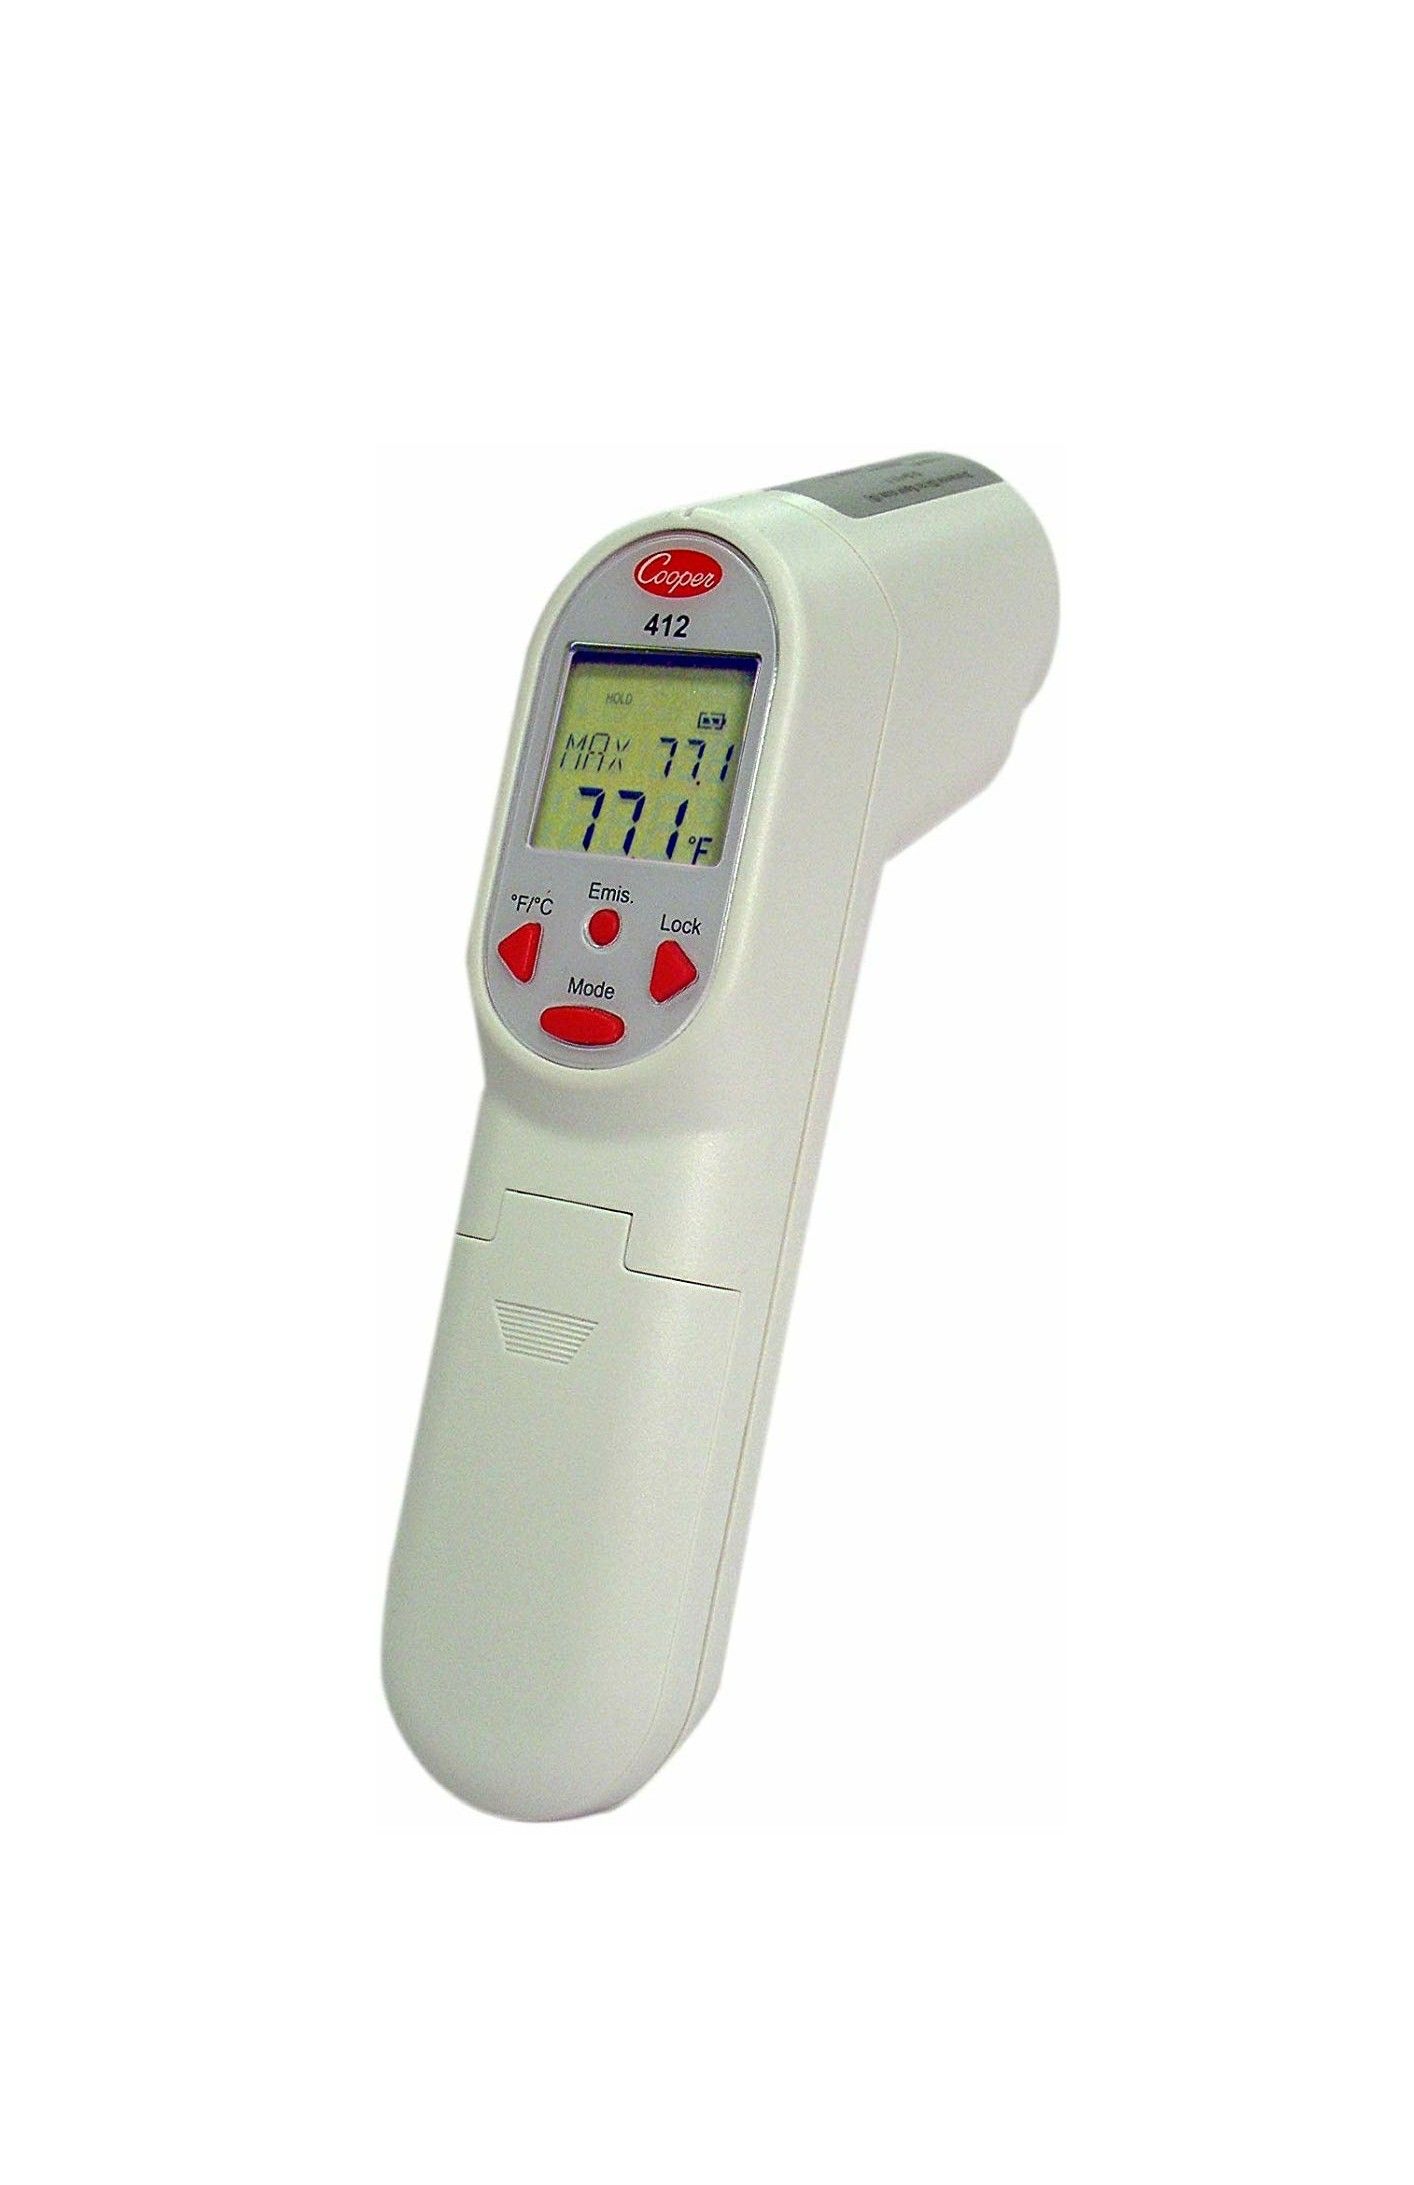 Cooper-Atkins 412-0-8 Digital Infrared Thermometer with Laser and Thermocouple Jack, CE, RoHS and WEEE Certified, -76/932°F Temperature Range